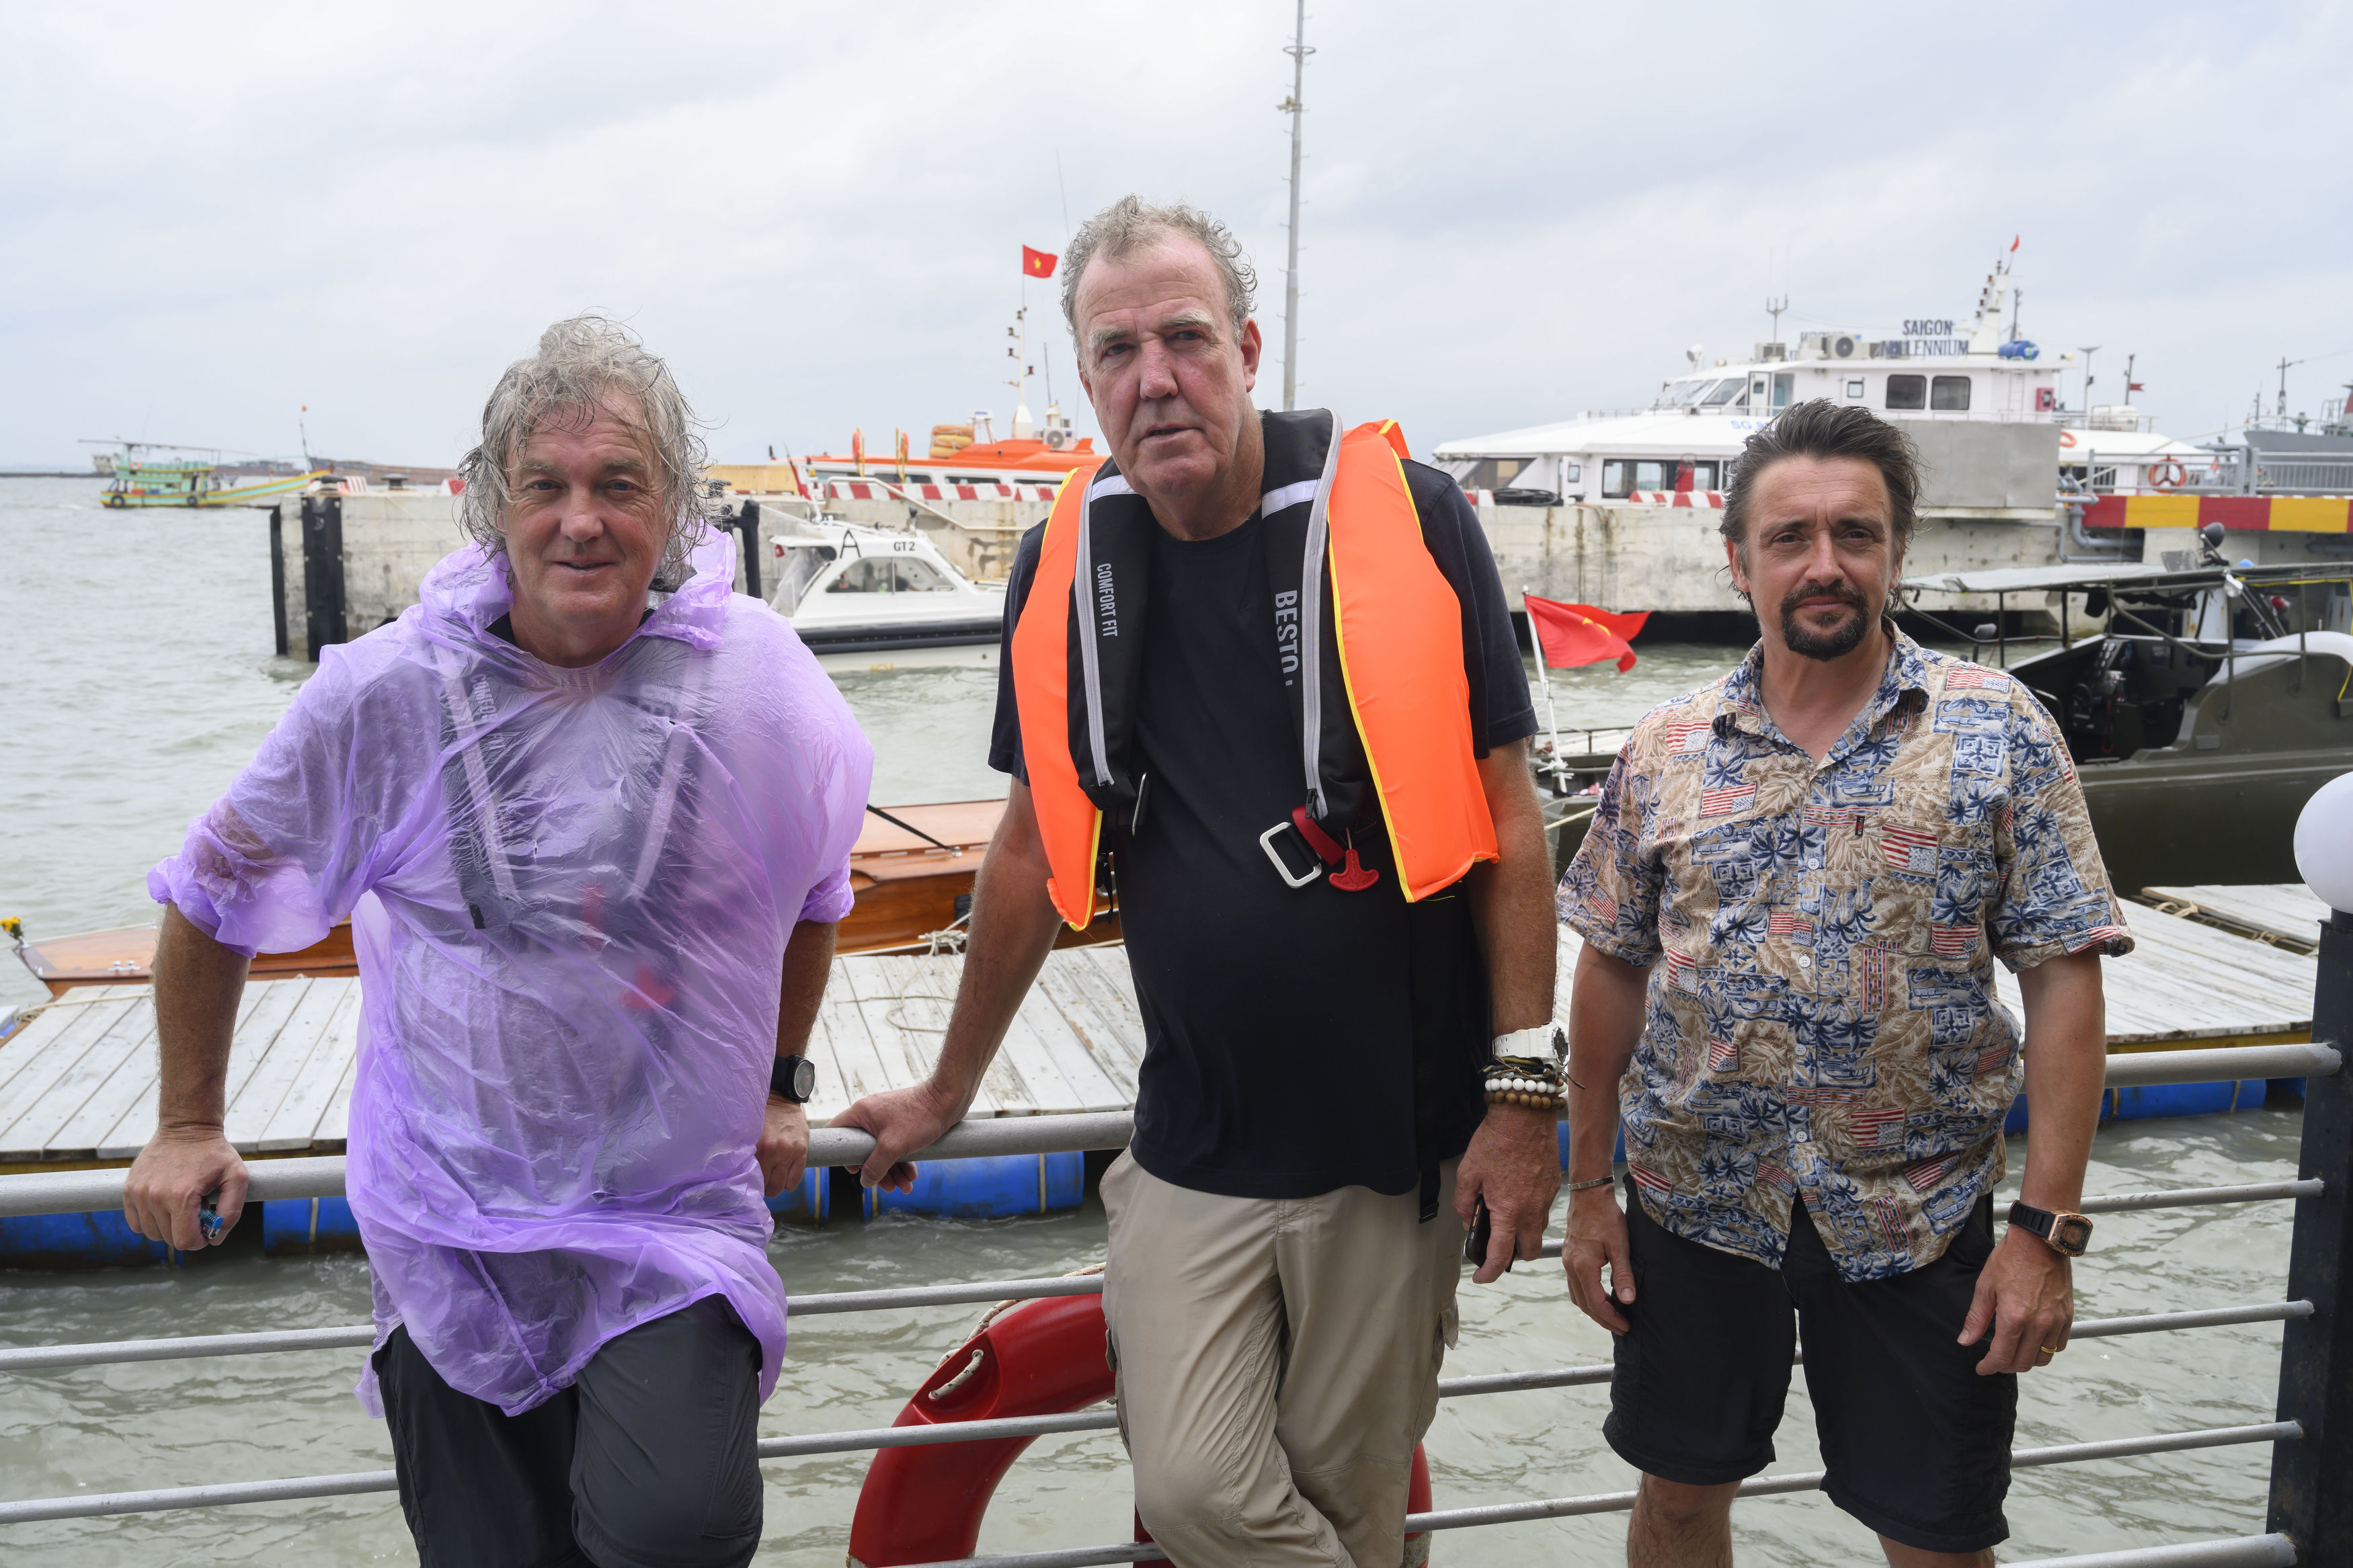 James May, Jeremy Clarkson and Richard Hammond started their own streaming series in 2016